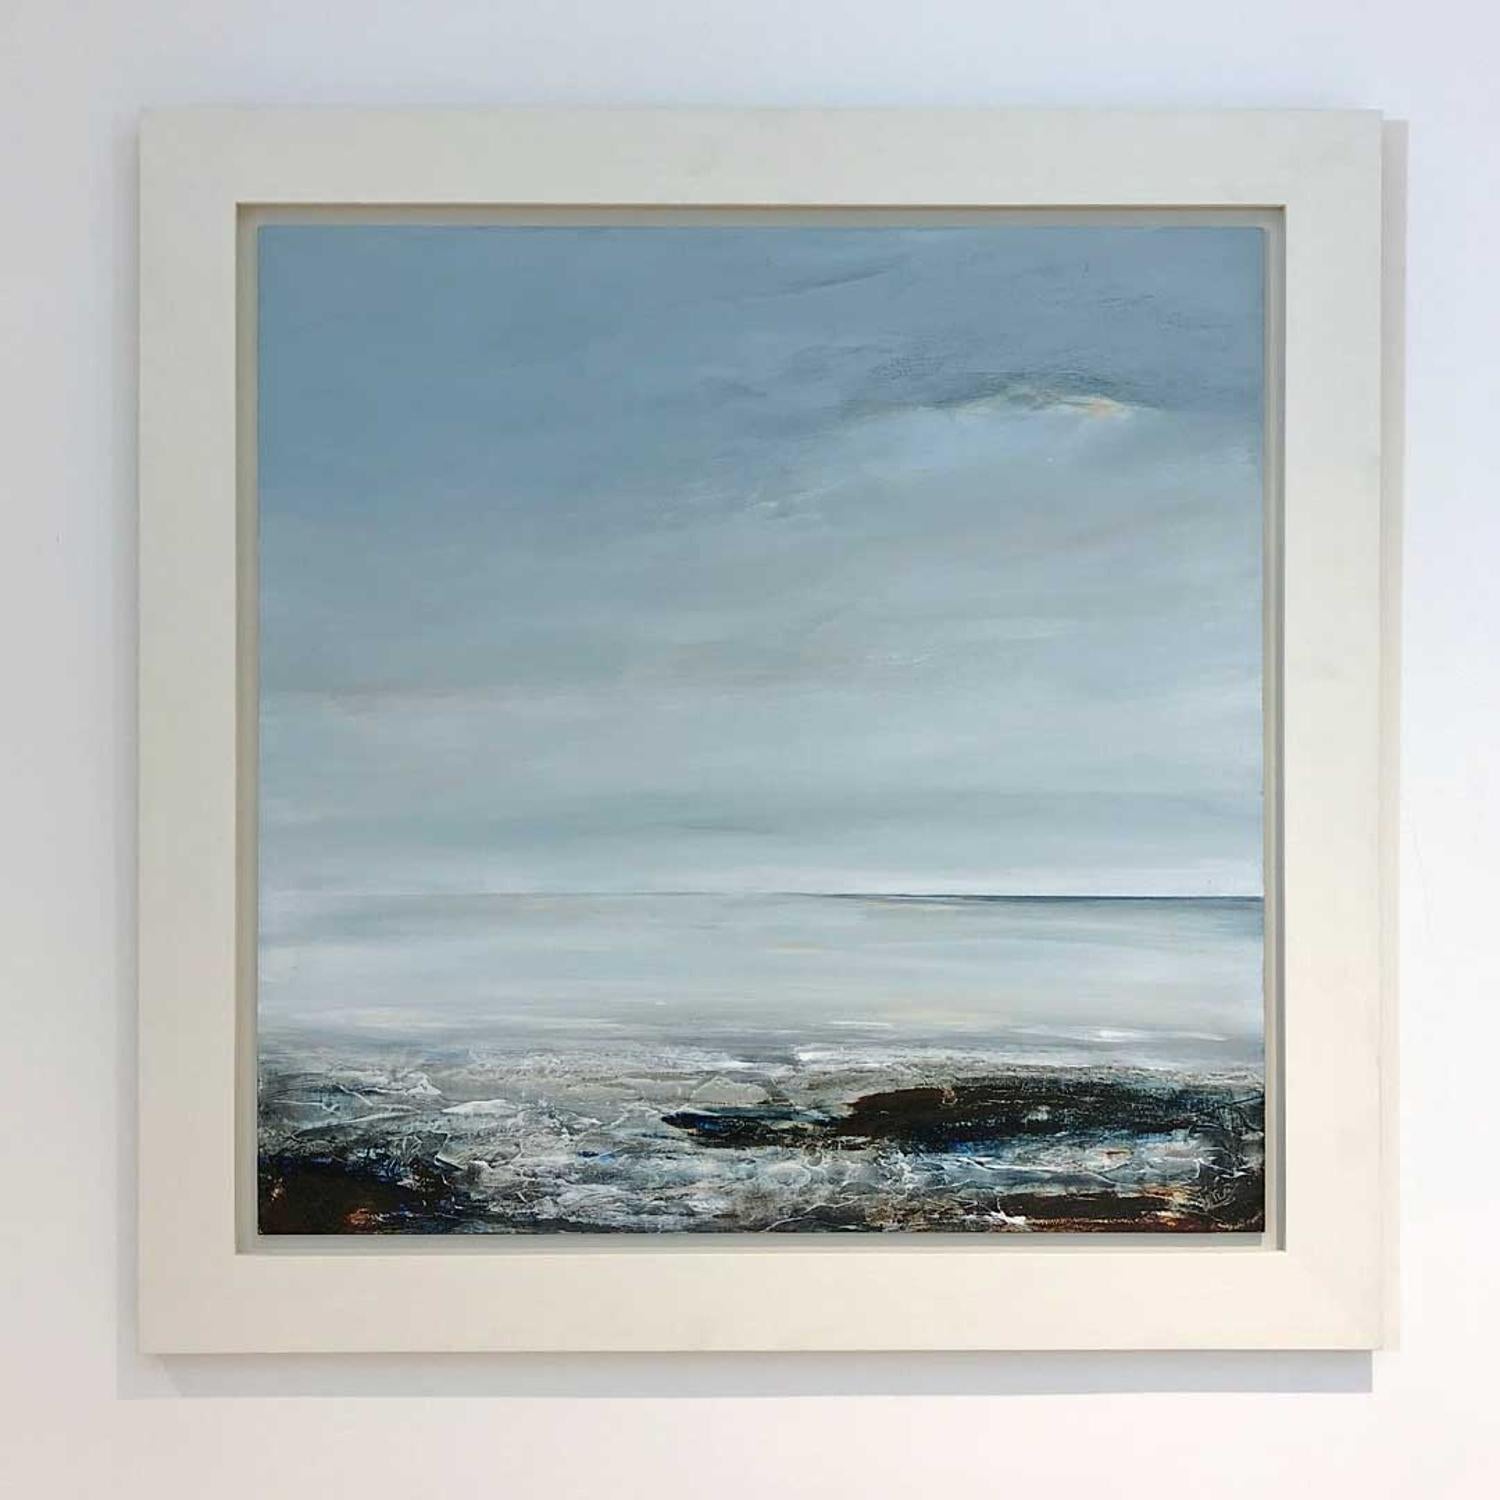 Sunlit Moment - Brooding British Seascape: Acrylic on Board - Painting by Leila Godden UA